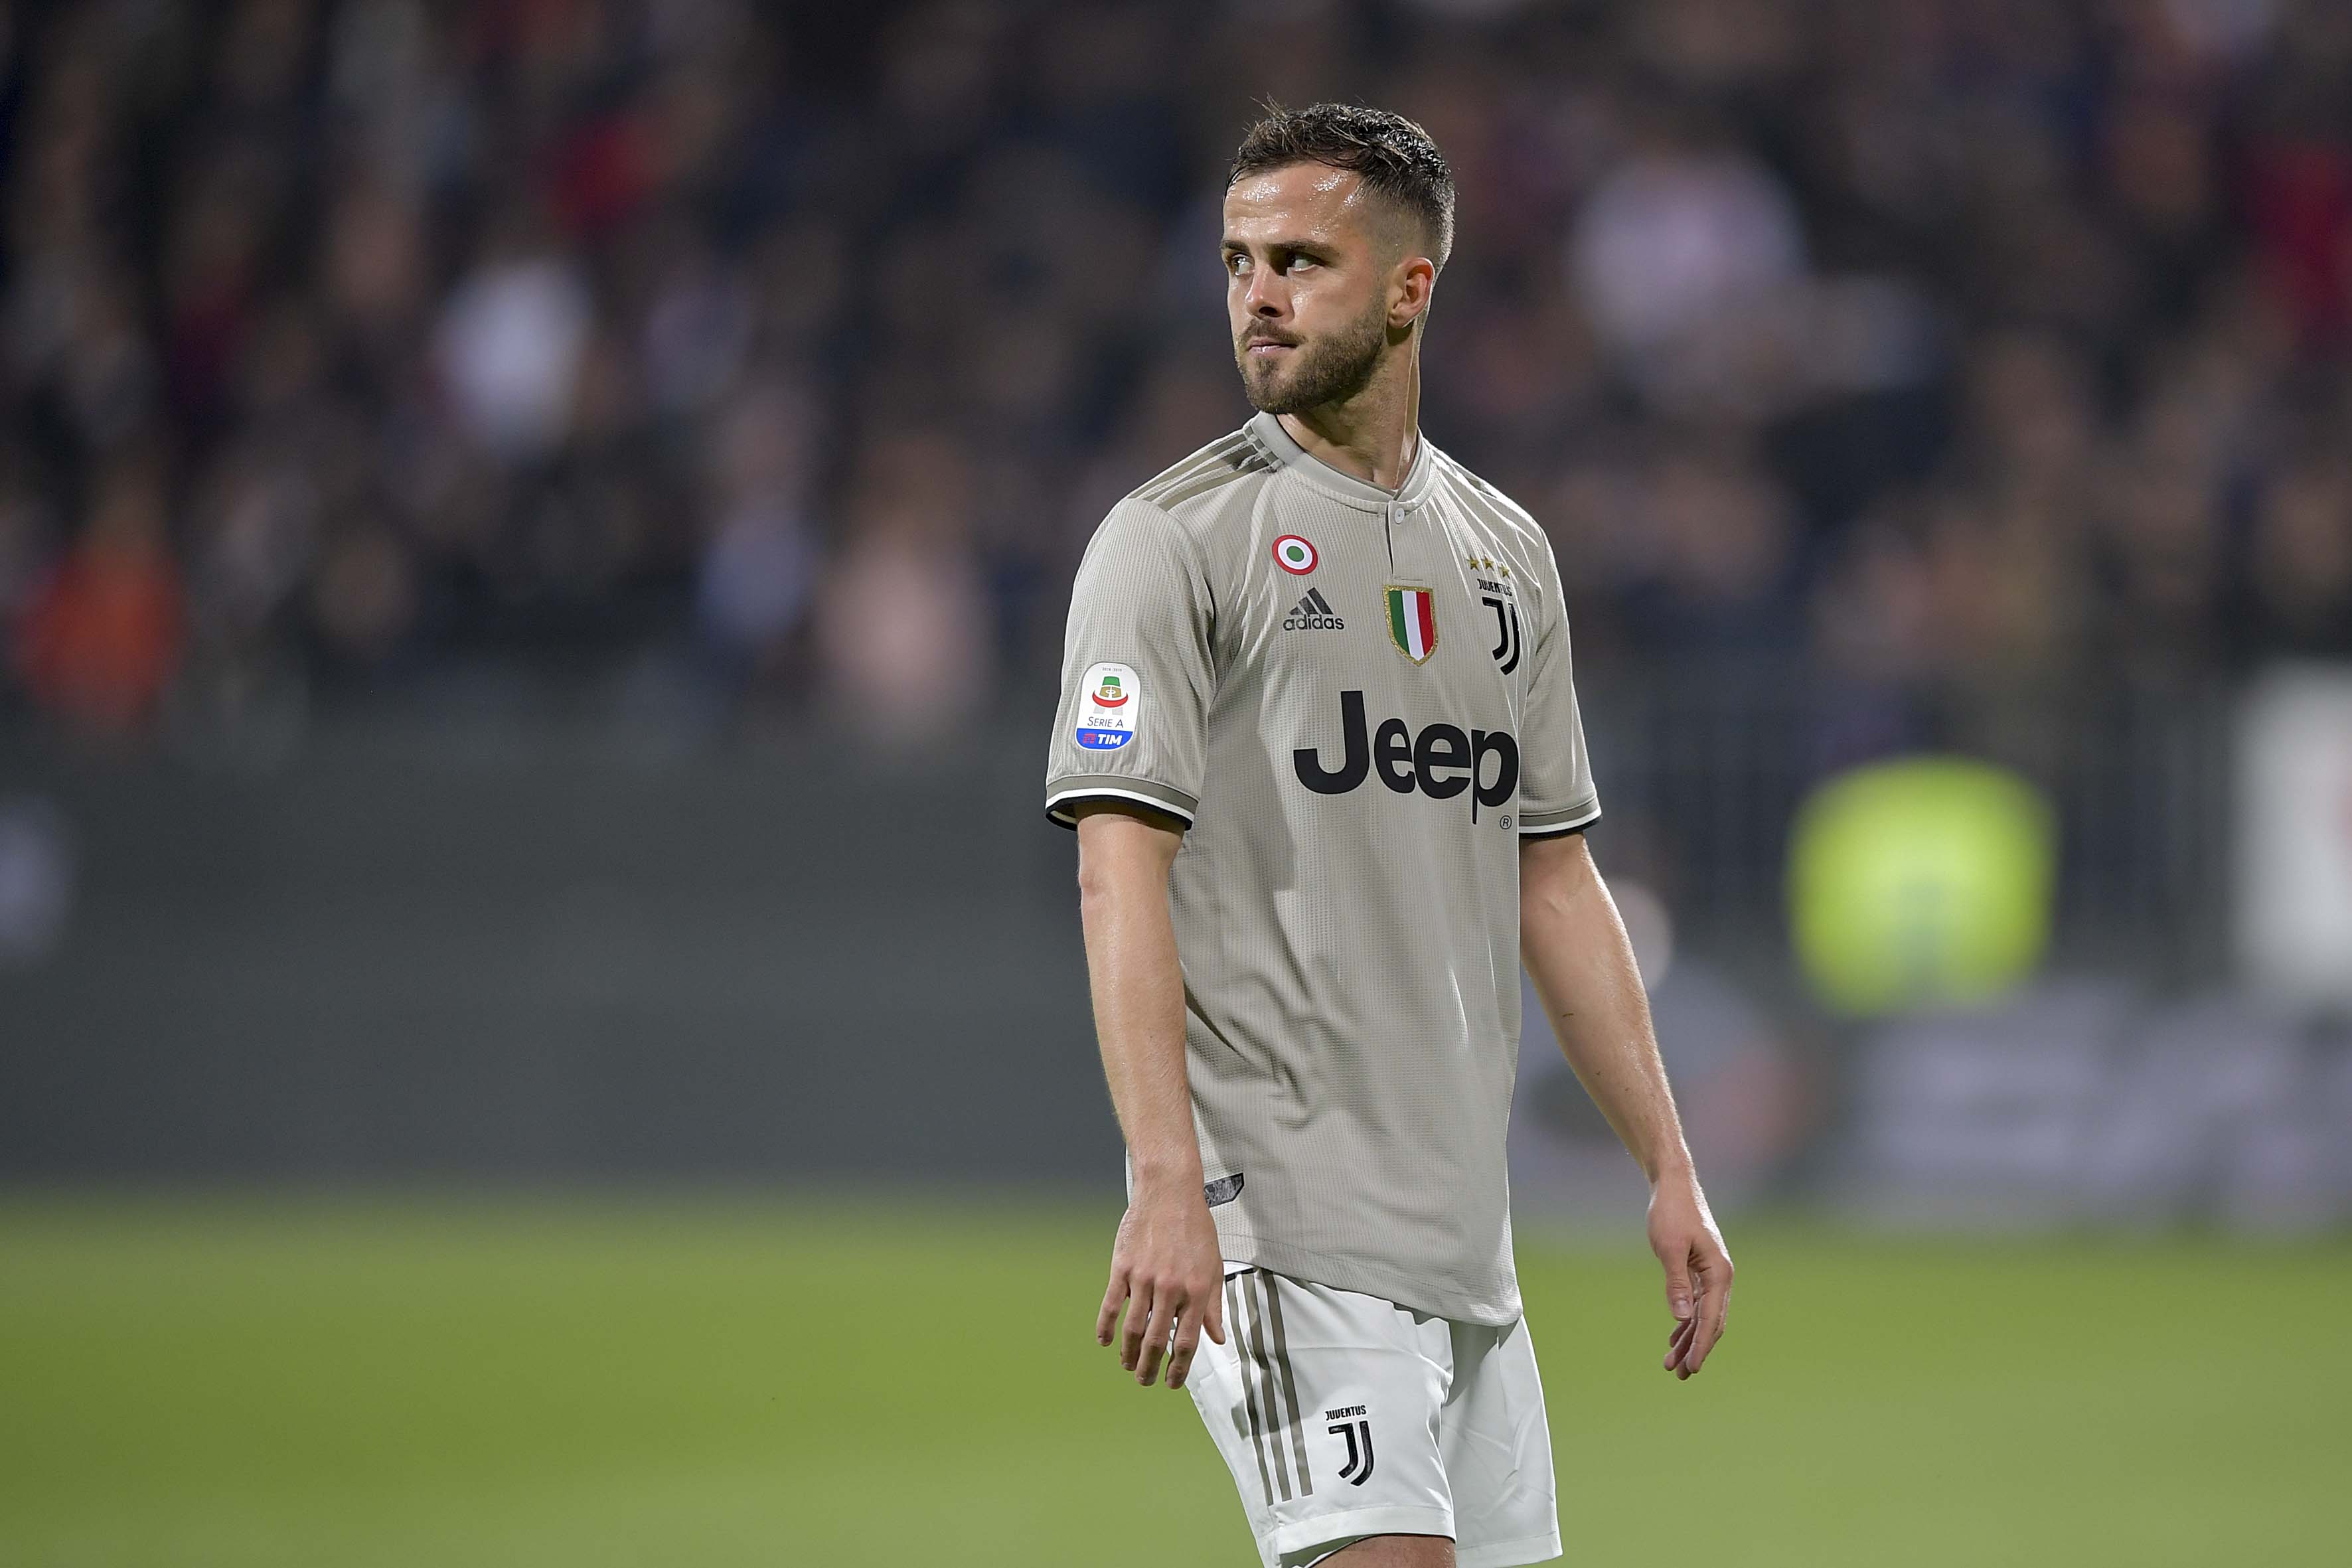 CAGLIARI, ITALY - APRIL 02:  Juventus player Miralem Pjanic during the Serie A match between Cagliari and Juventus at Sardegna Arena on April 3, 2019 in Cagliari, Italy.  (Photo by Daniele Badolato - Juventus FC/Juventus FC via Getty Images)